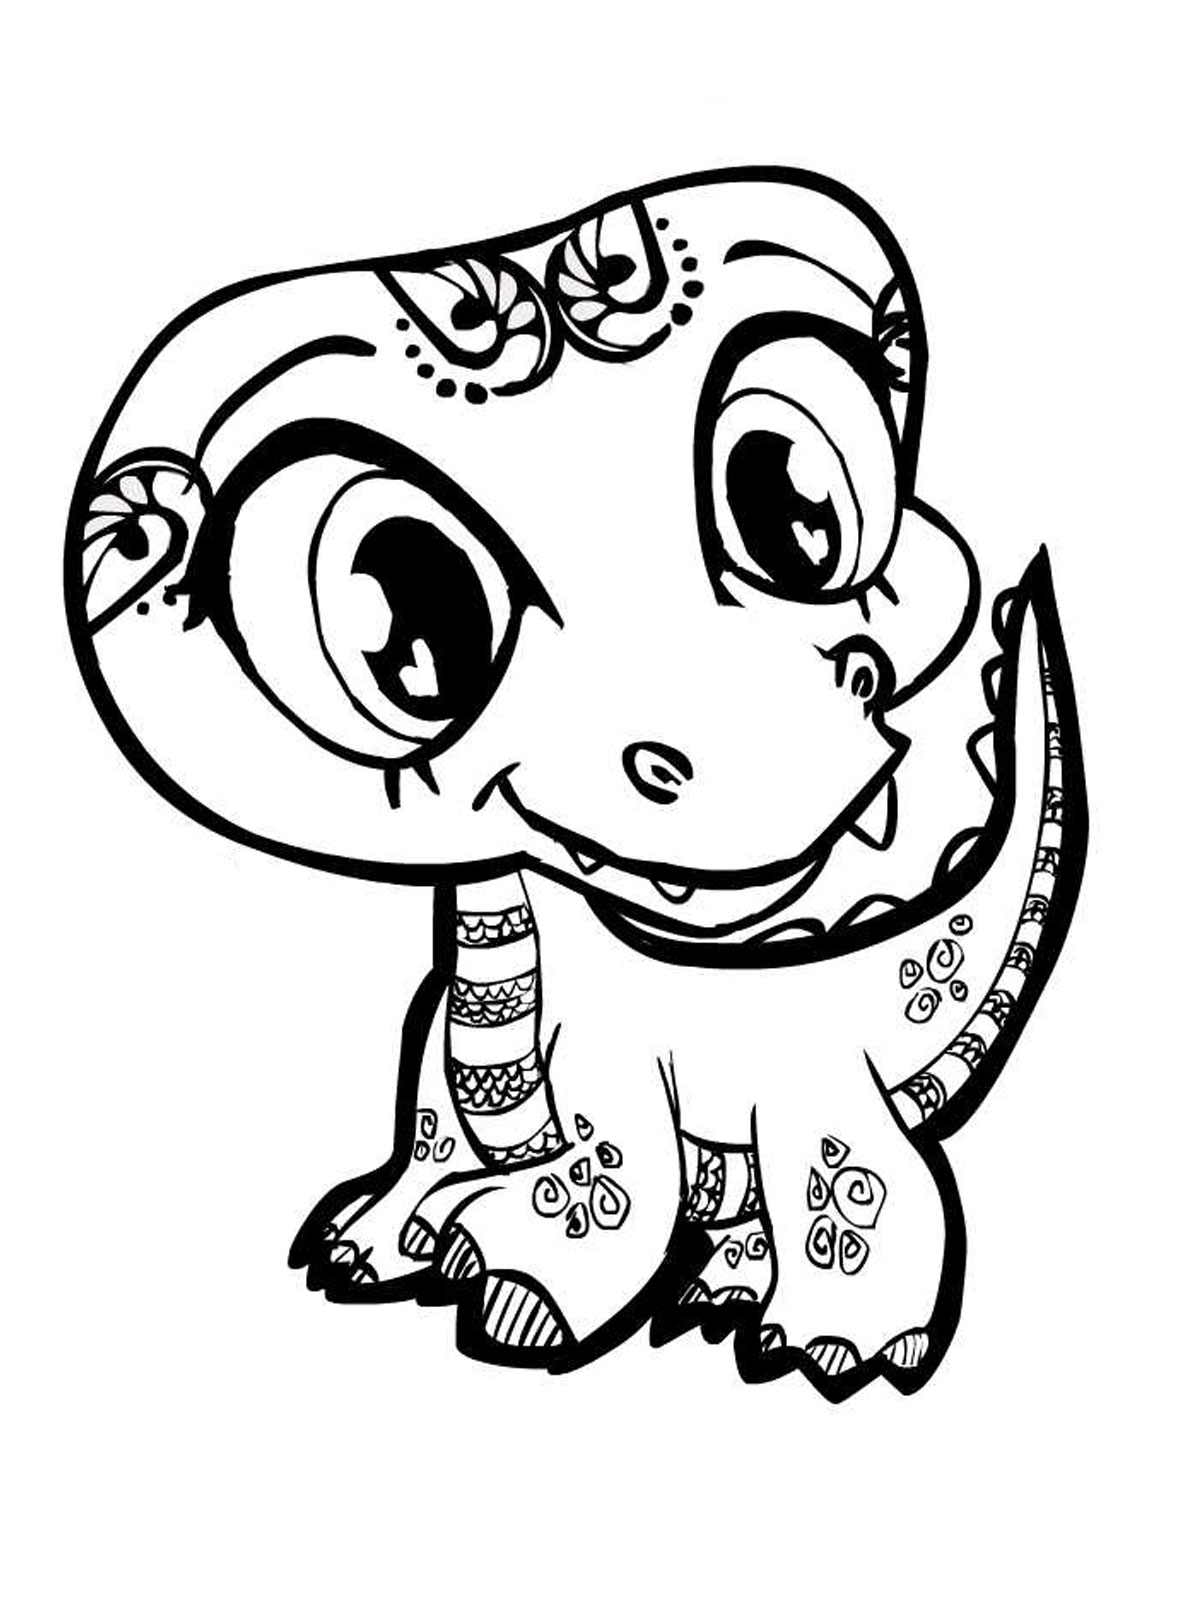 Cute Dinosaur With Big Eyes Coloring Page